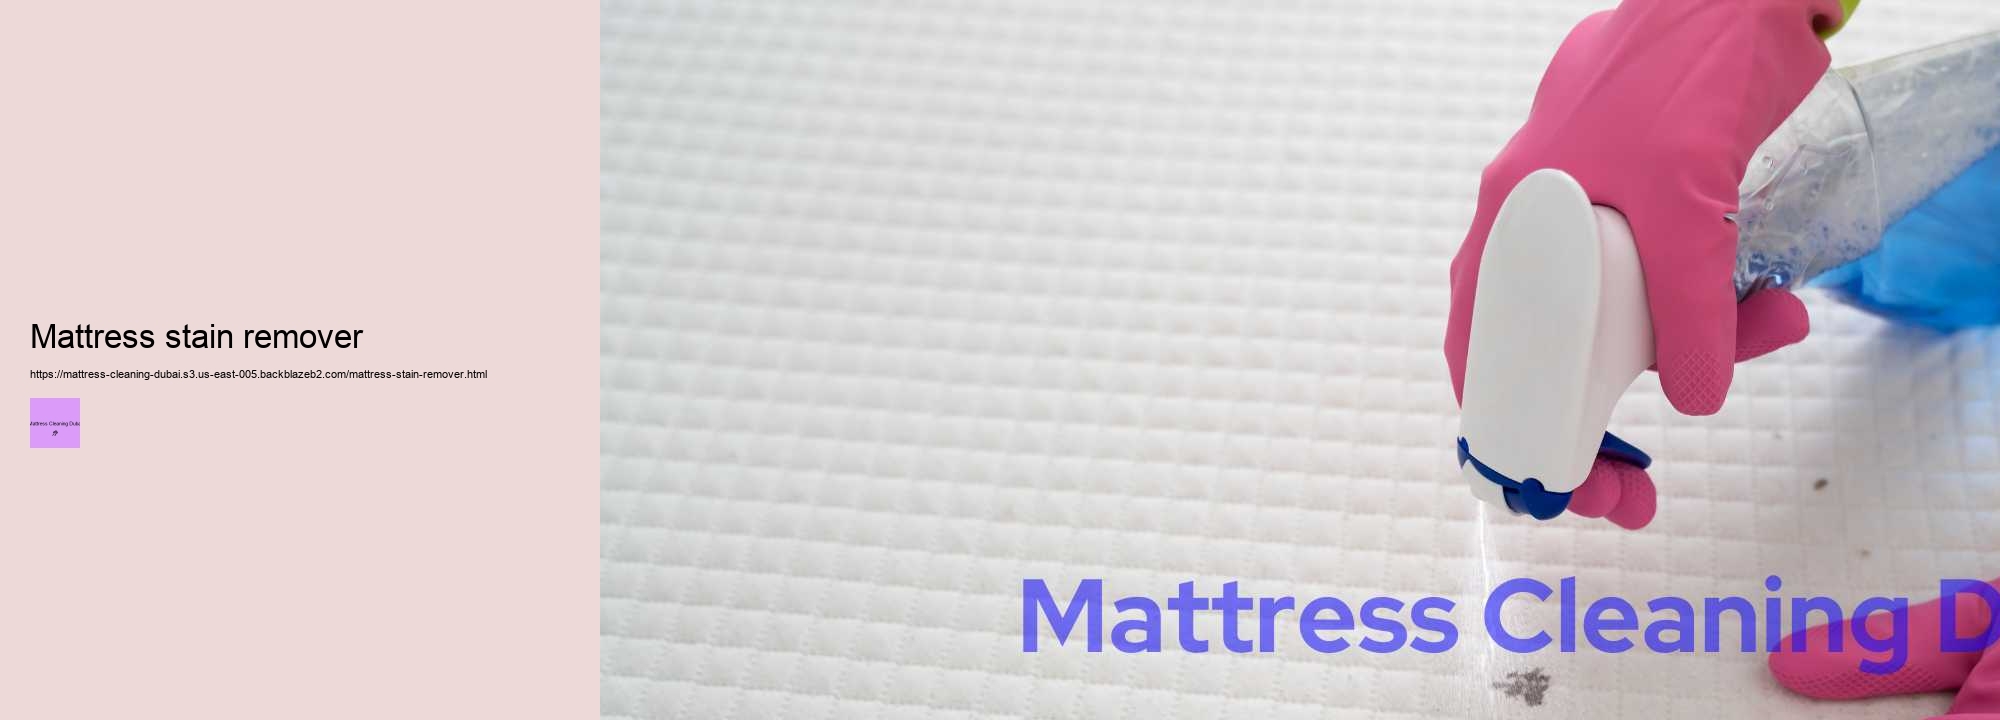 Mattress stain remover